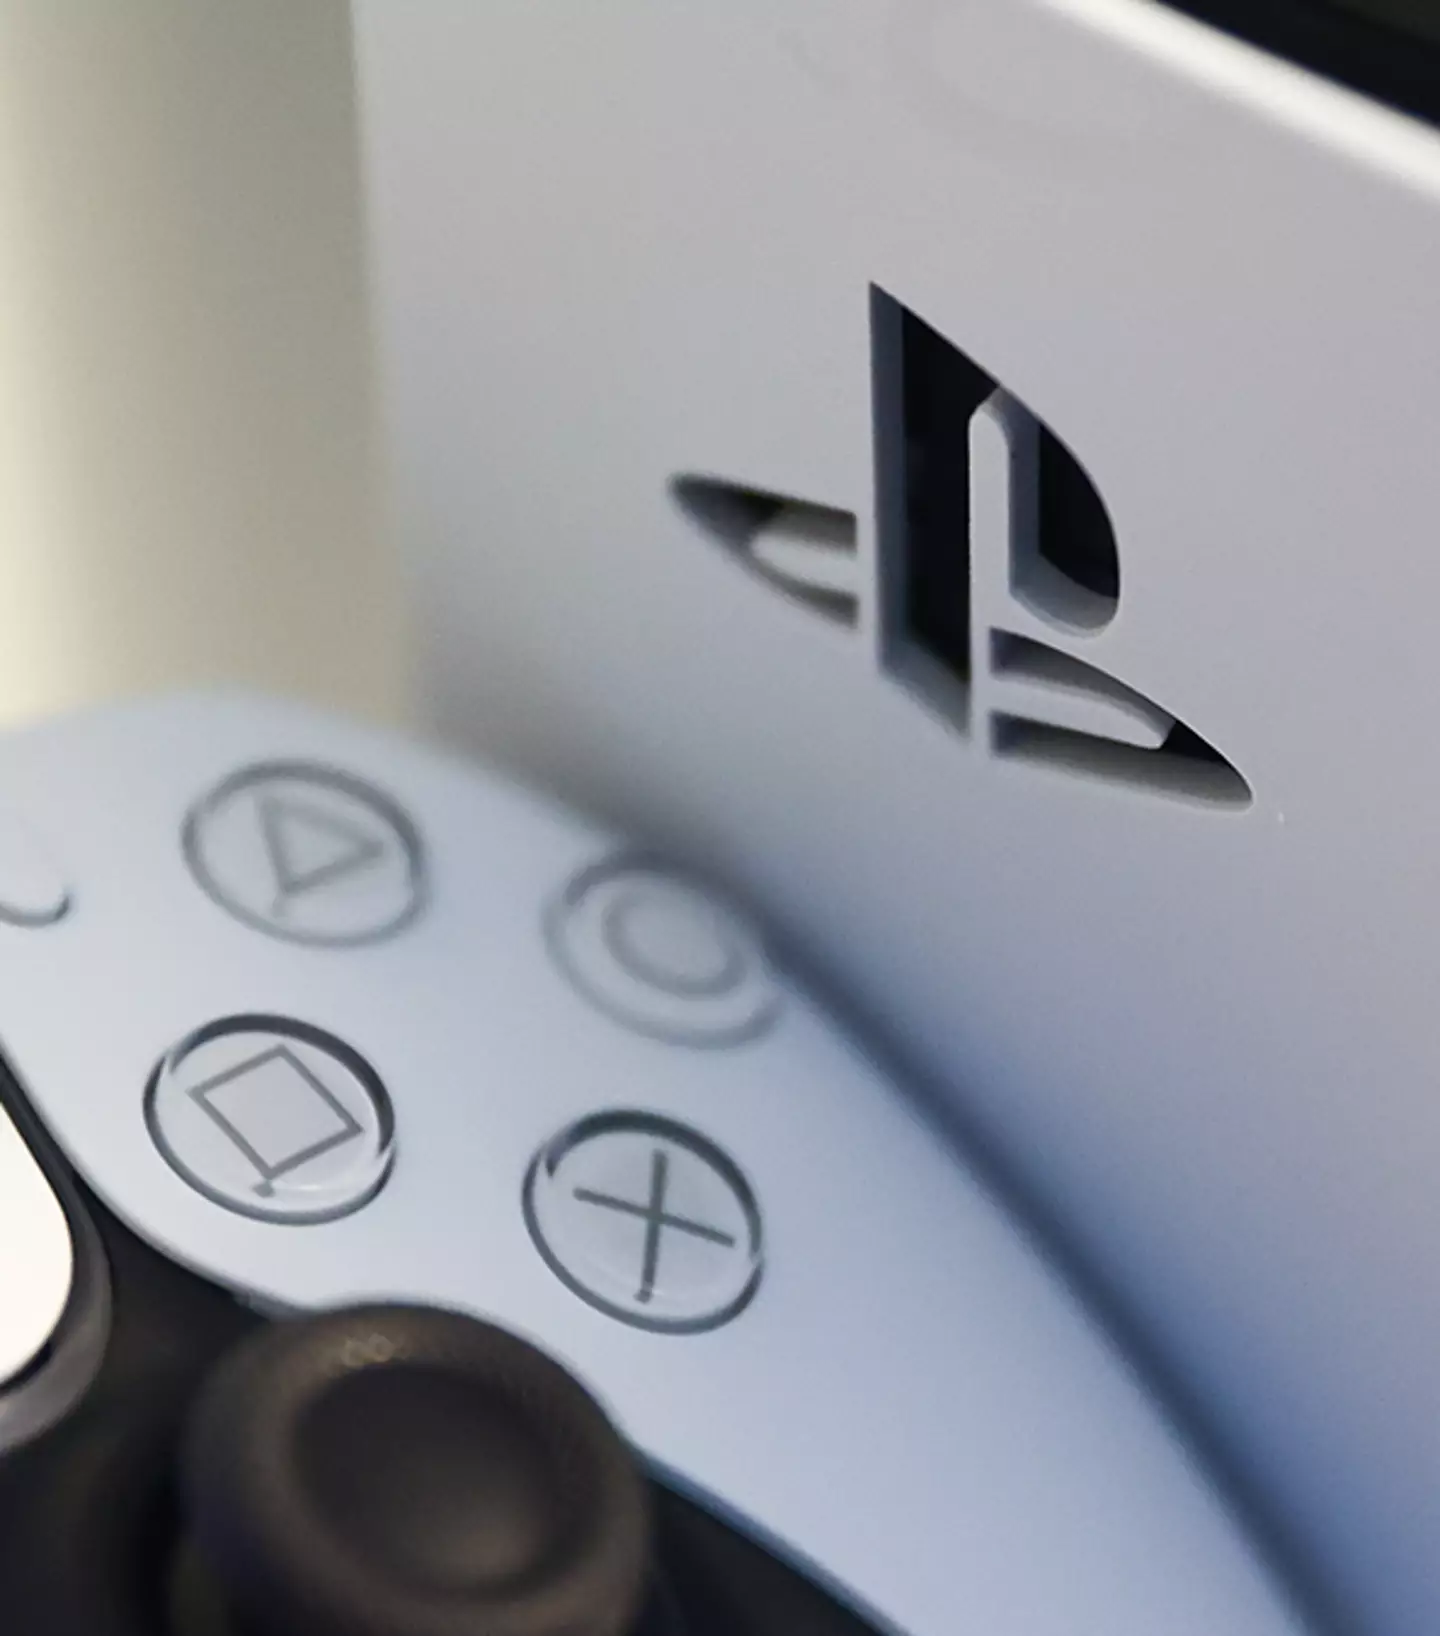 Sony has allegedly exploited its leading position in the gaming market / NurPhoto / Contributor / Getty